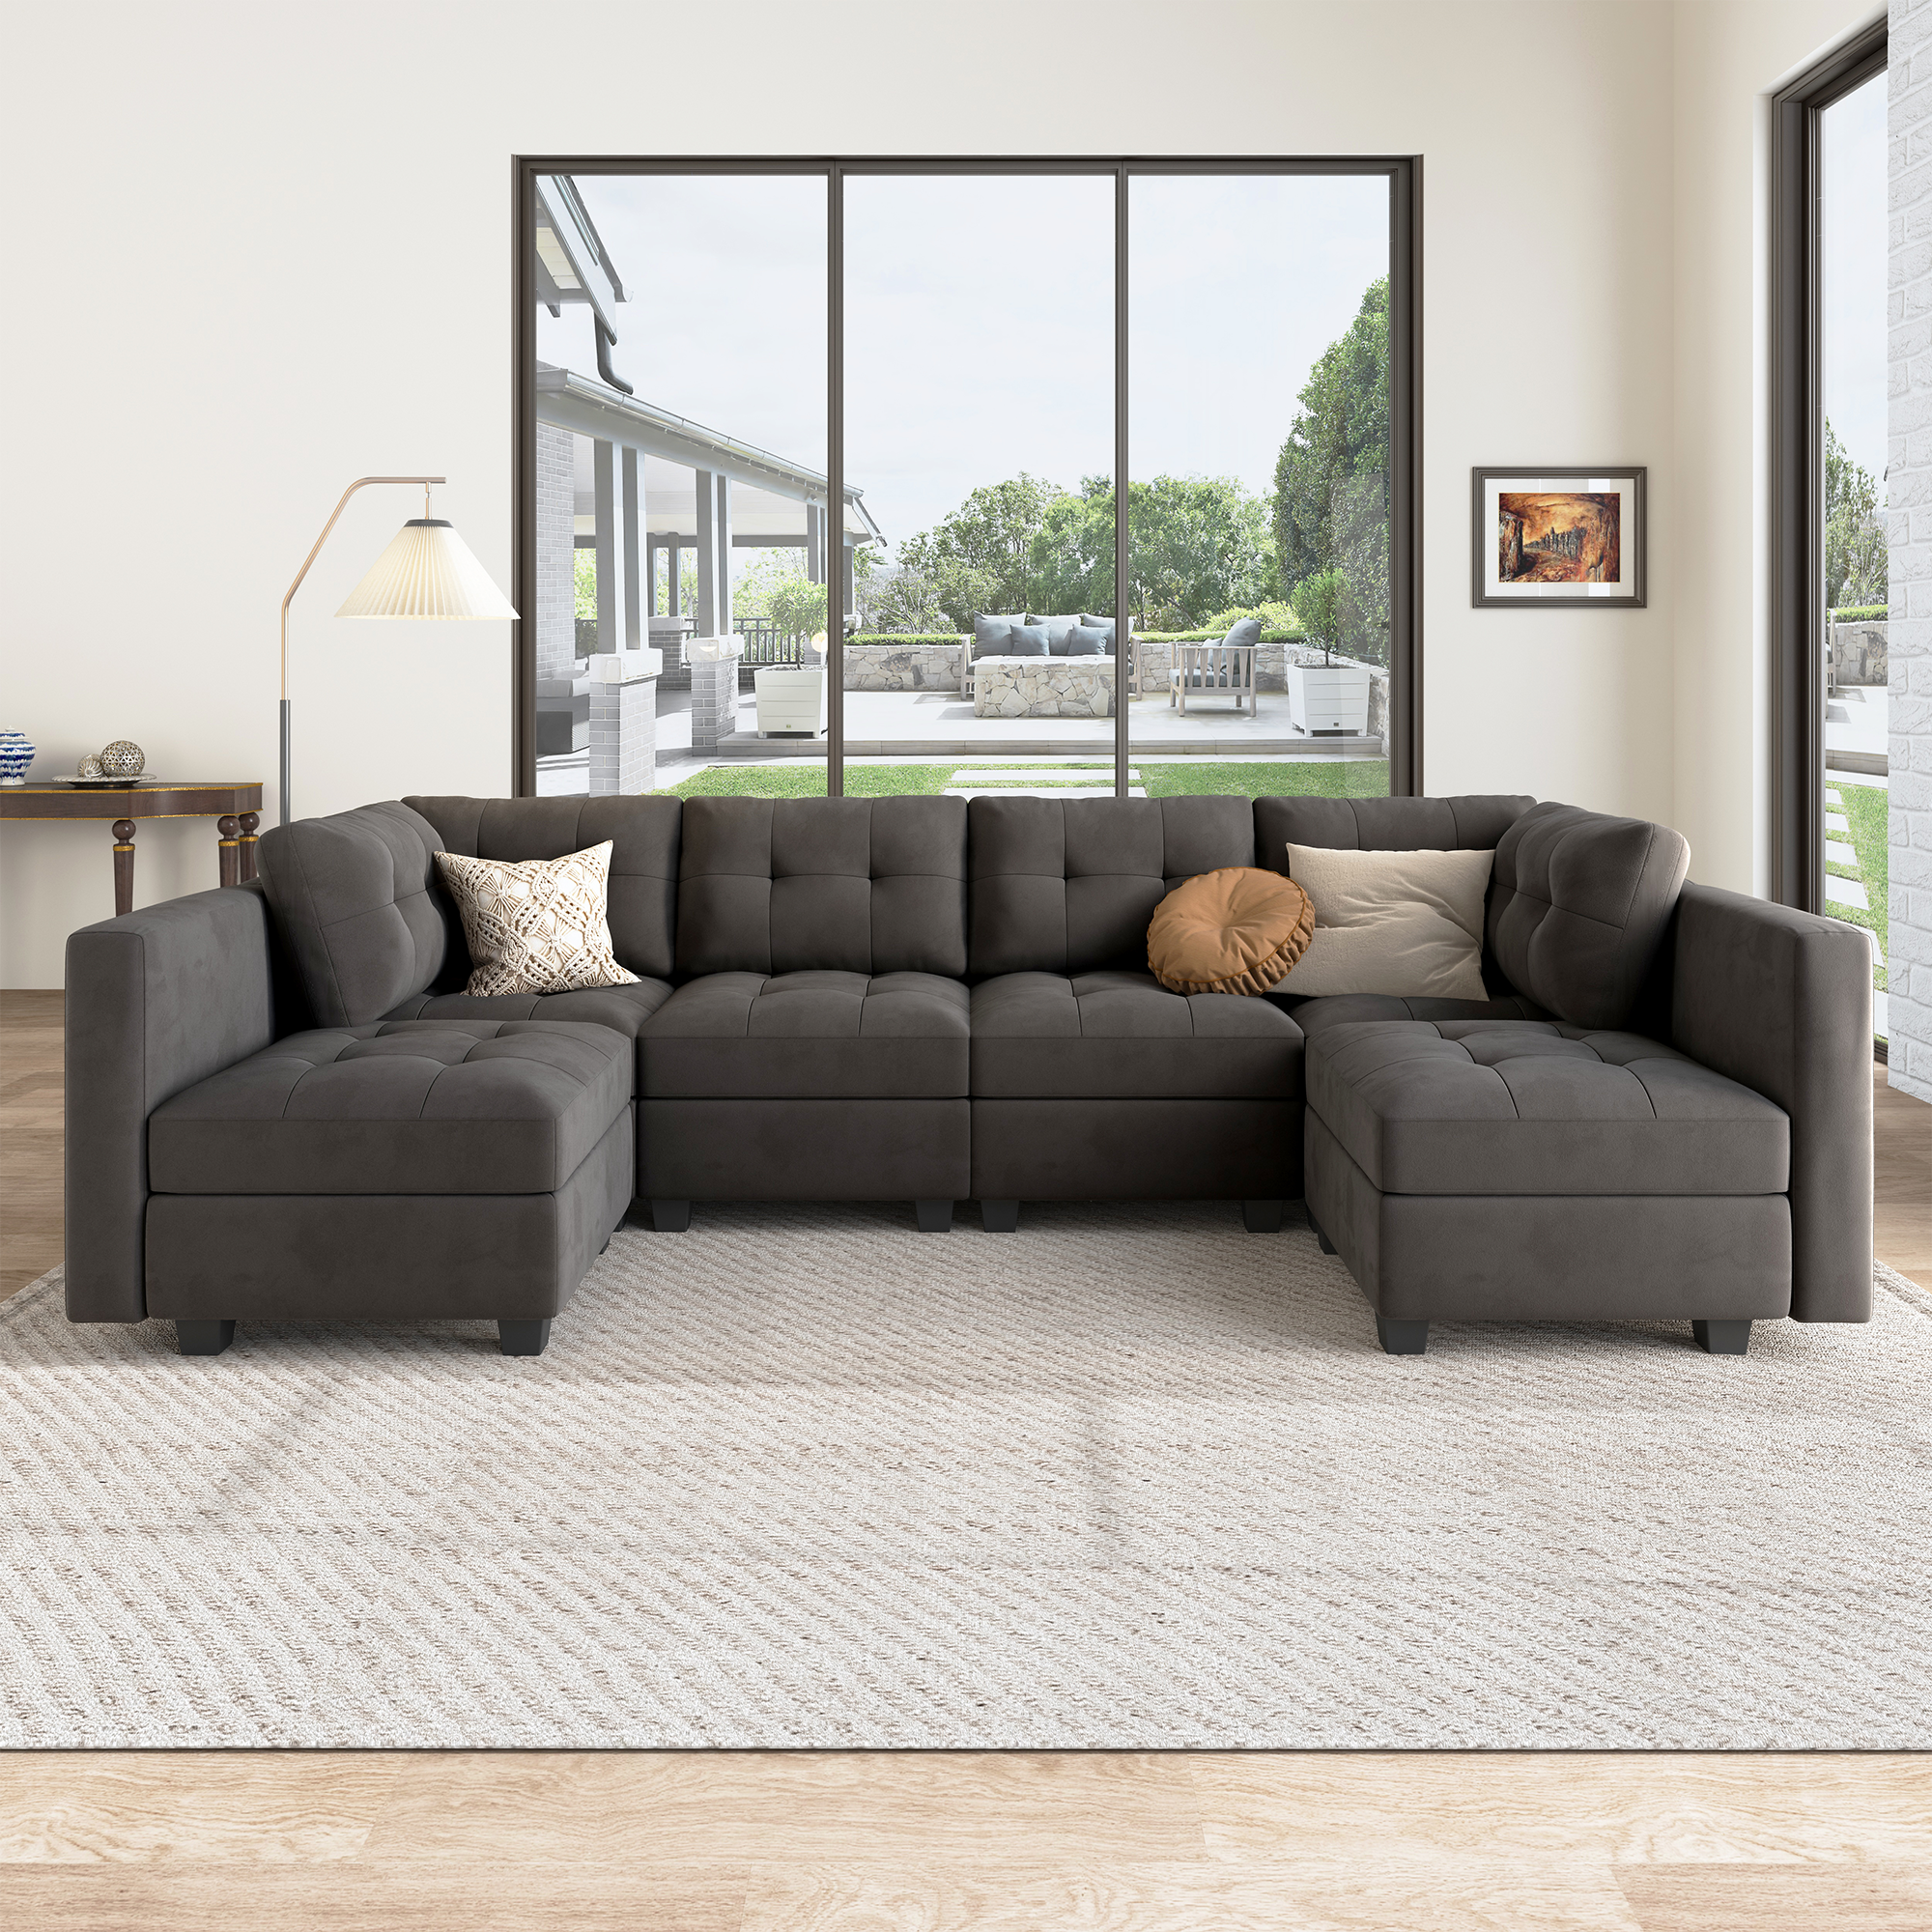 HONBAY 6-Piece Velvet Modular Sectional With Storage Seat